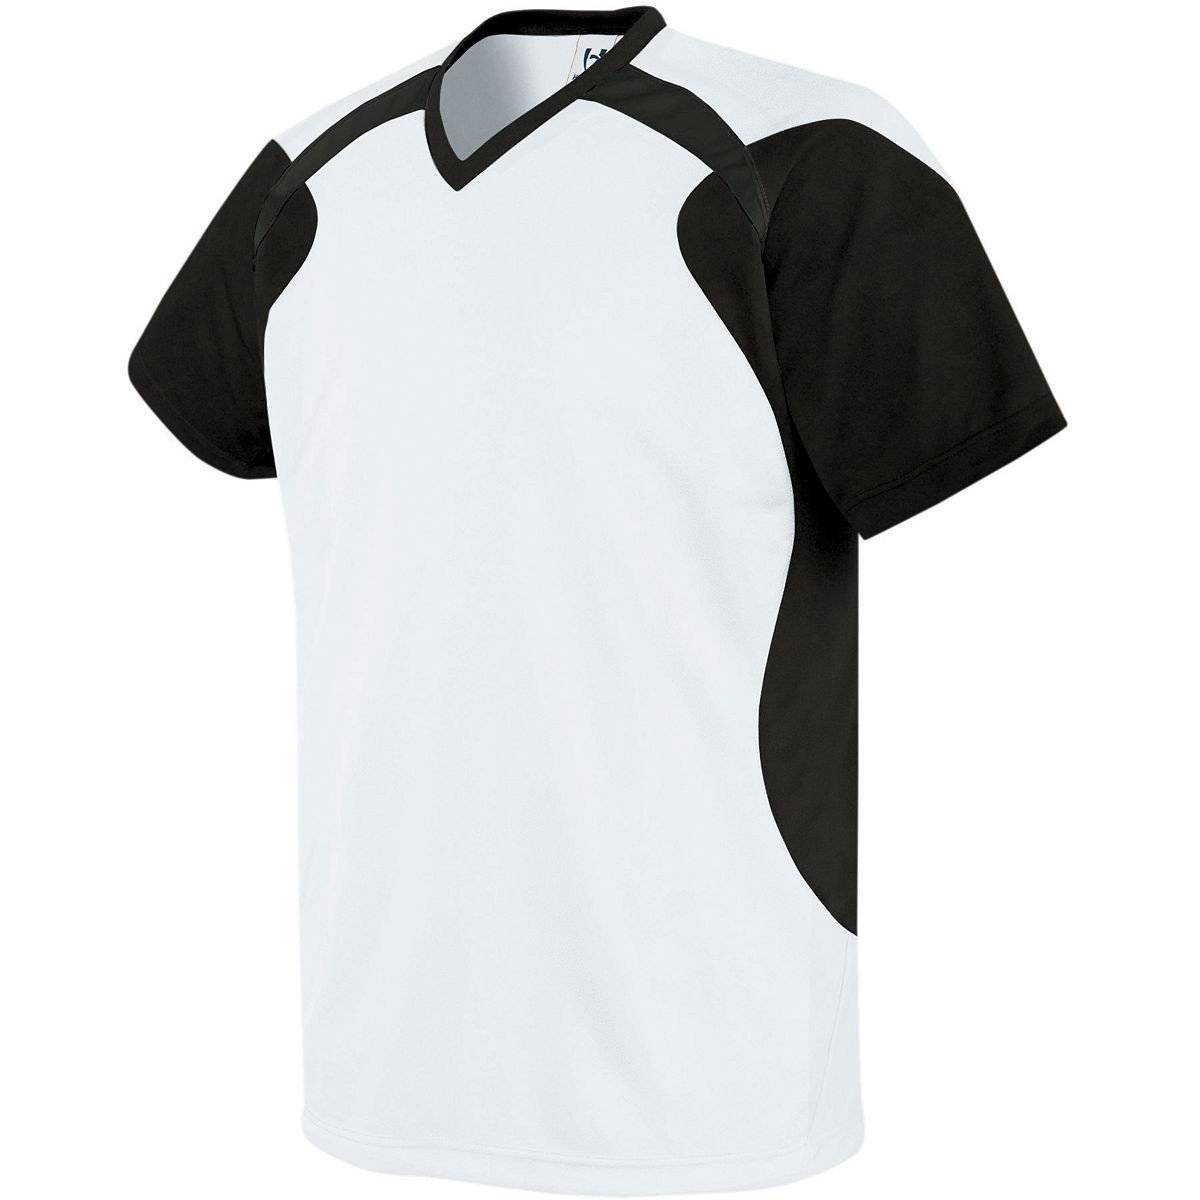 High Five 322710 Tempest Jersey Adult - White Black Black - HIT a Double